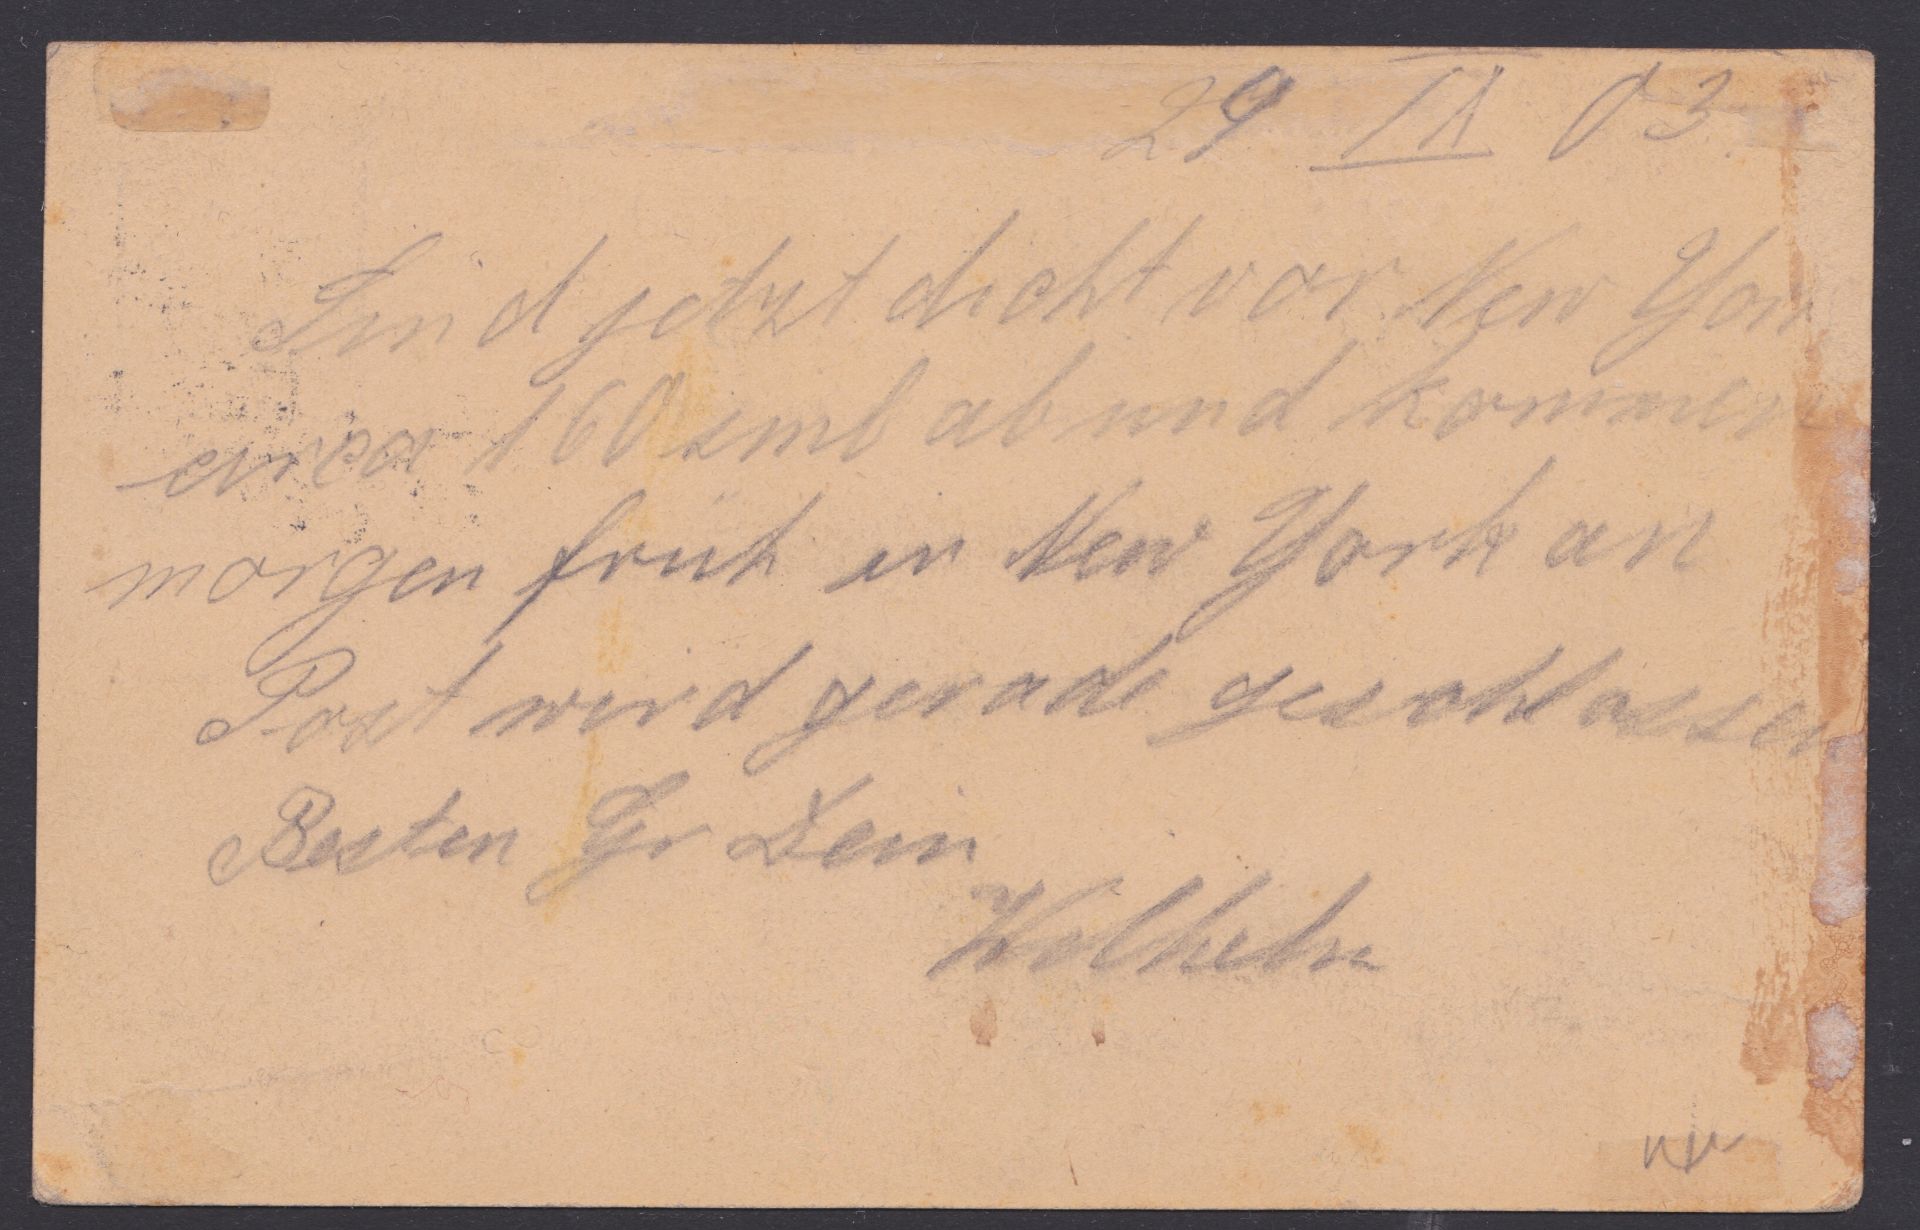 JAMAICA / GERMANY / UNITED STATES 1903 - Jamaica 1d postal stationery Post Card to Germany cancelled - Image 2 of 2